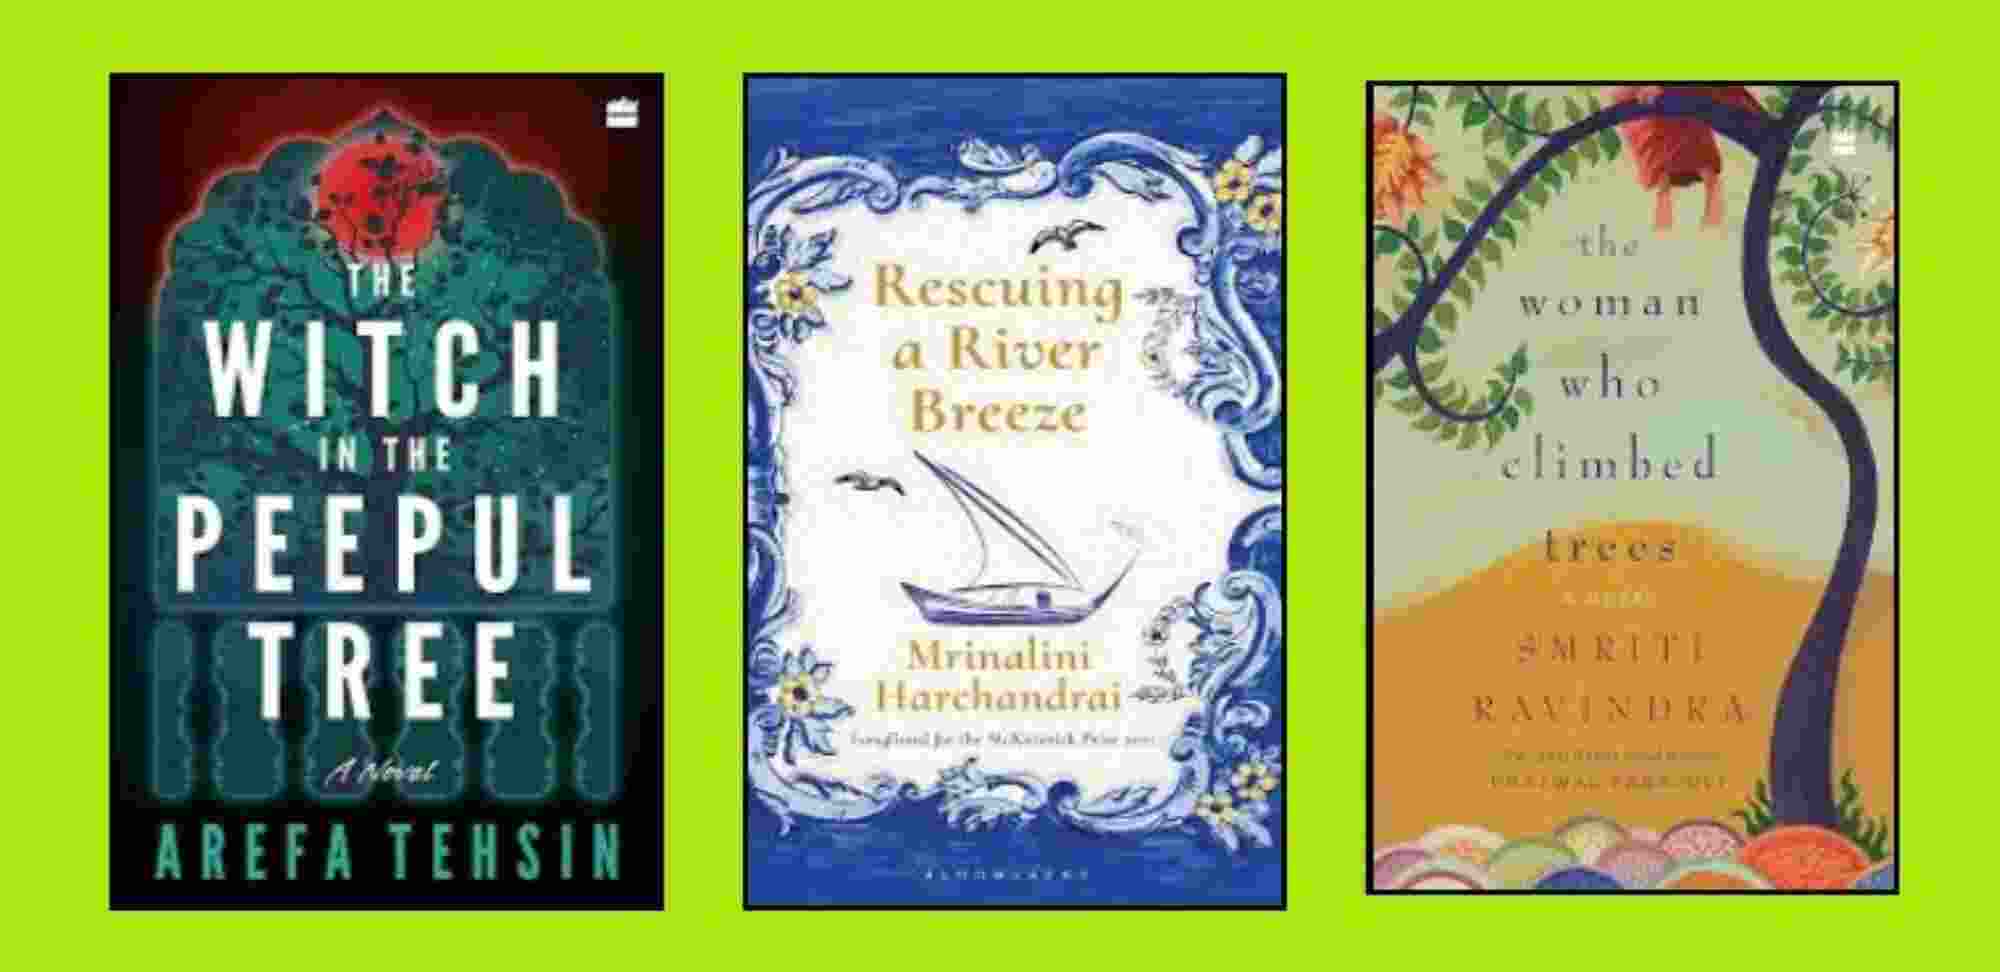 Other books shortlisted include Woman Who Climbed Trees by Nepali-Indian writer Smriti Ravindra, Spell of Good Things by Nigerian writer Ayobami Adebayo, The Idle Stance of the Tippler Pigeon by Safinah Danish Elahi of Pakistan and Brotherless Nights by Sri Lankan-American author VV Ganeshananthan.